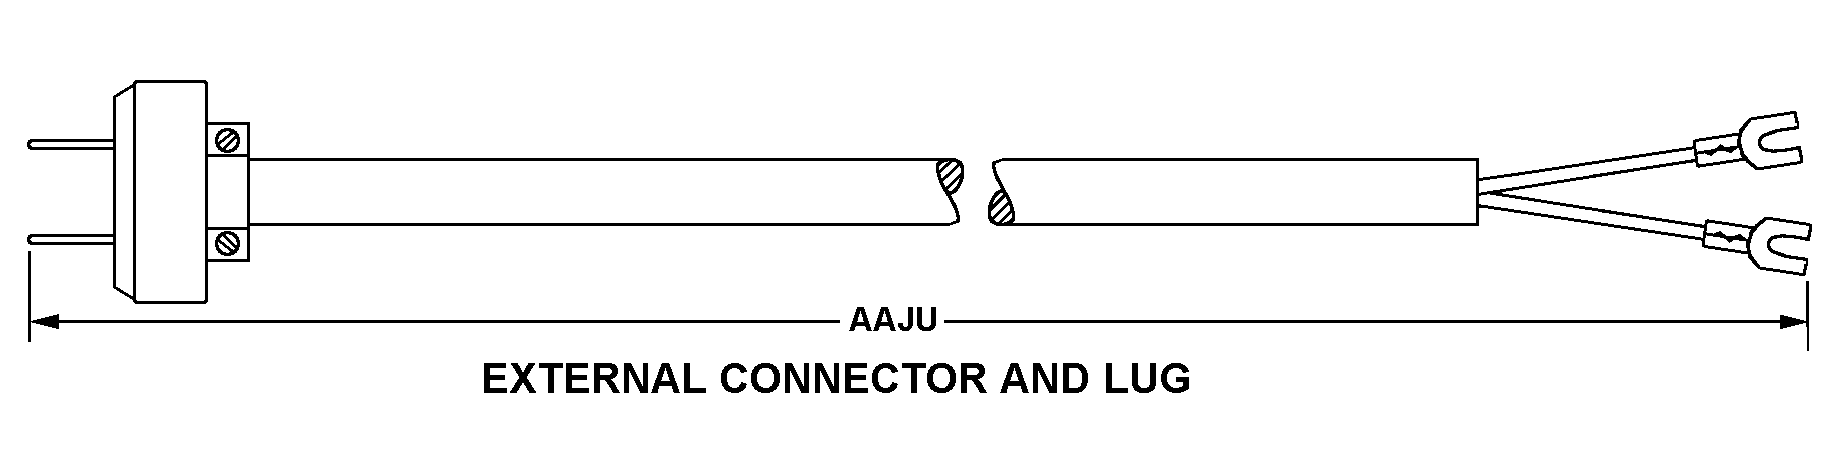 EXTERNAL CONNECTOR AND LUG style nsn 5995-00-549-4857